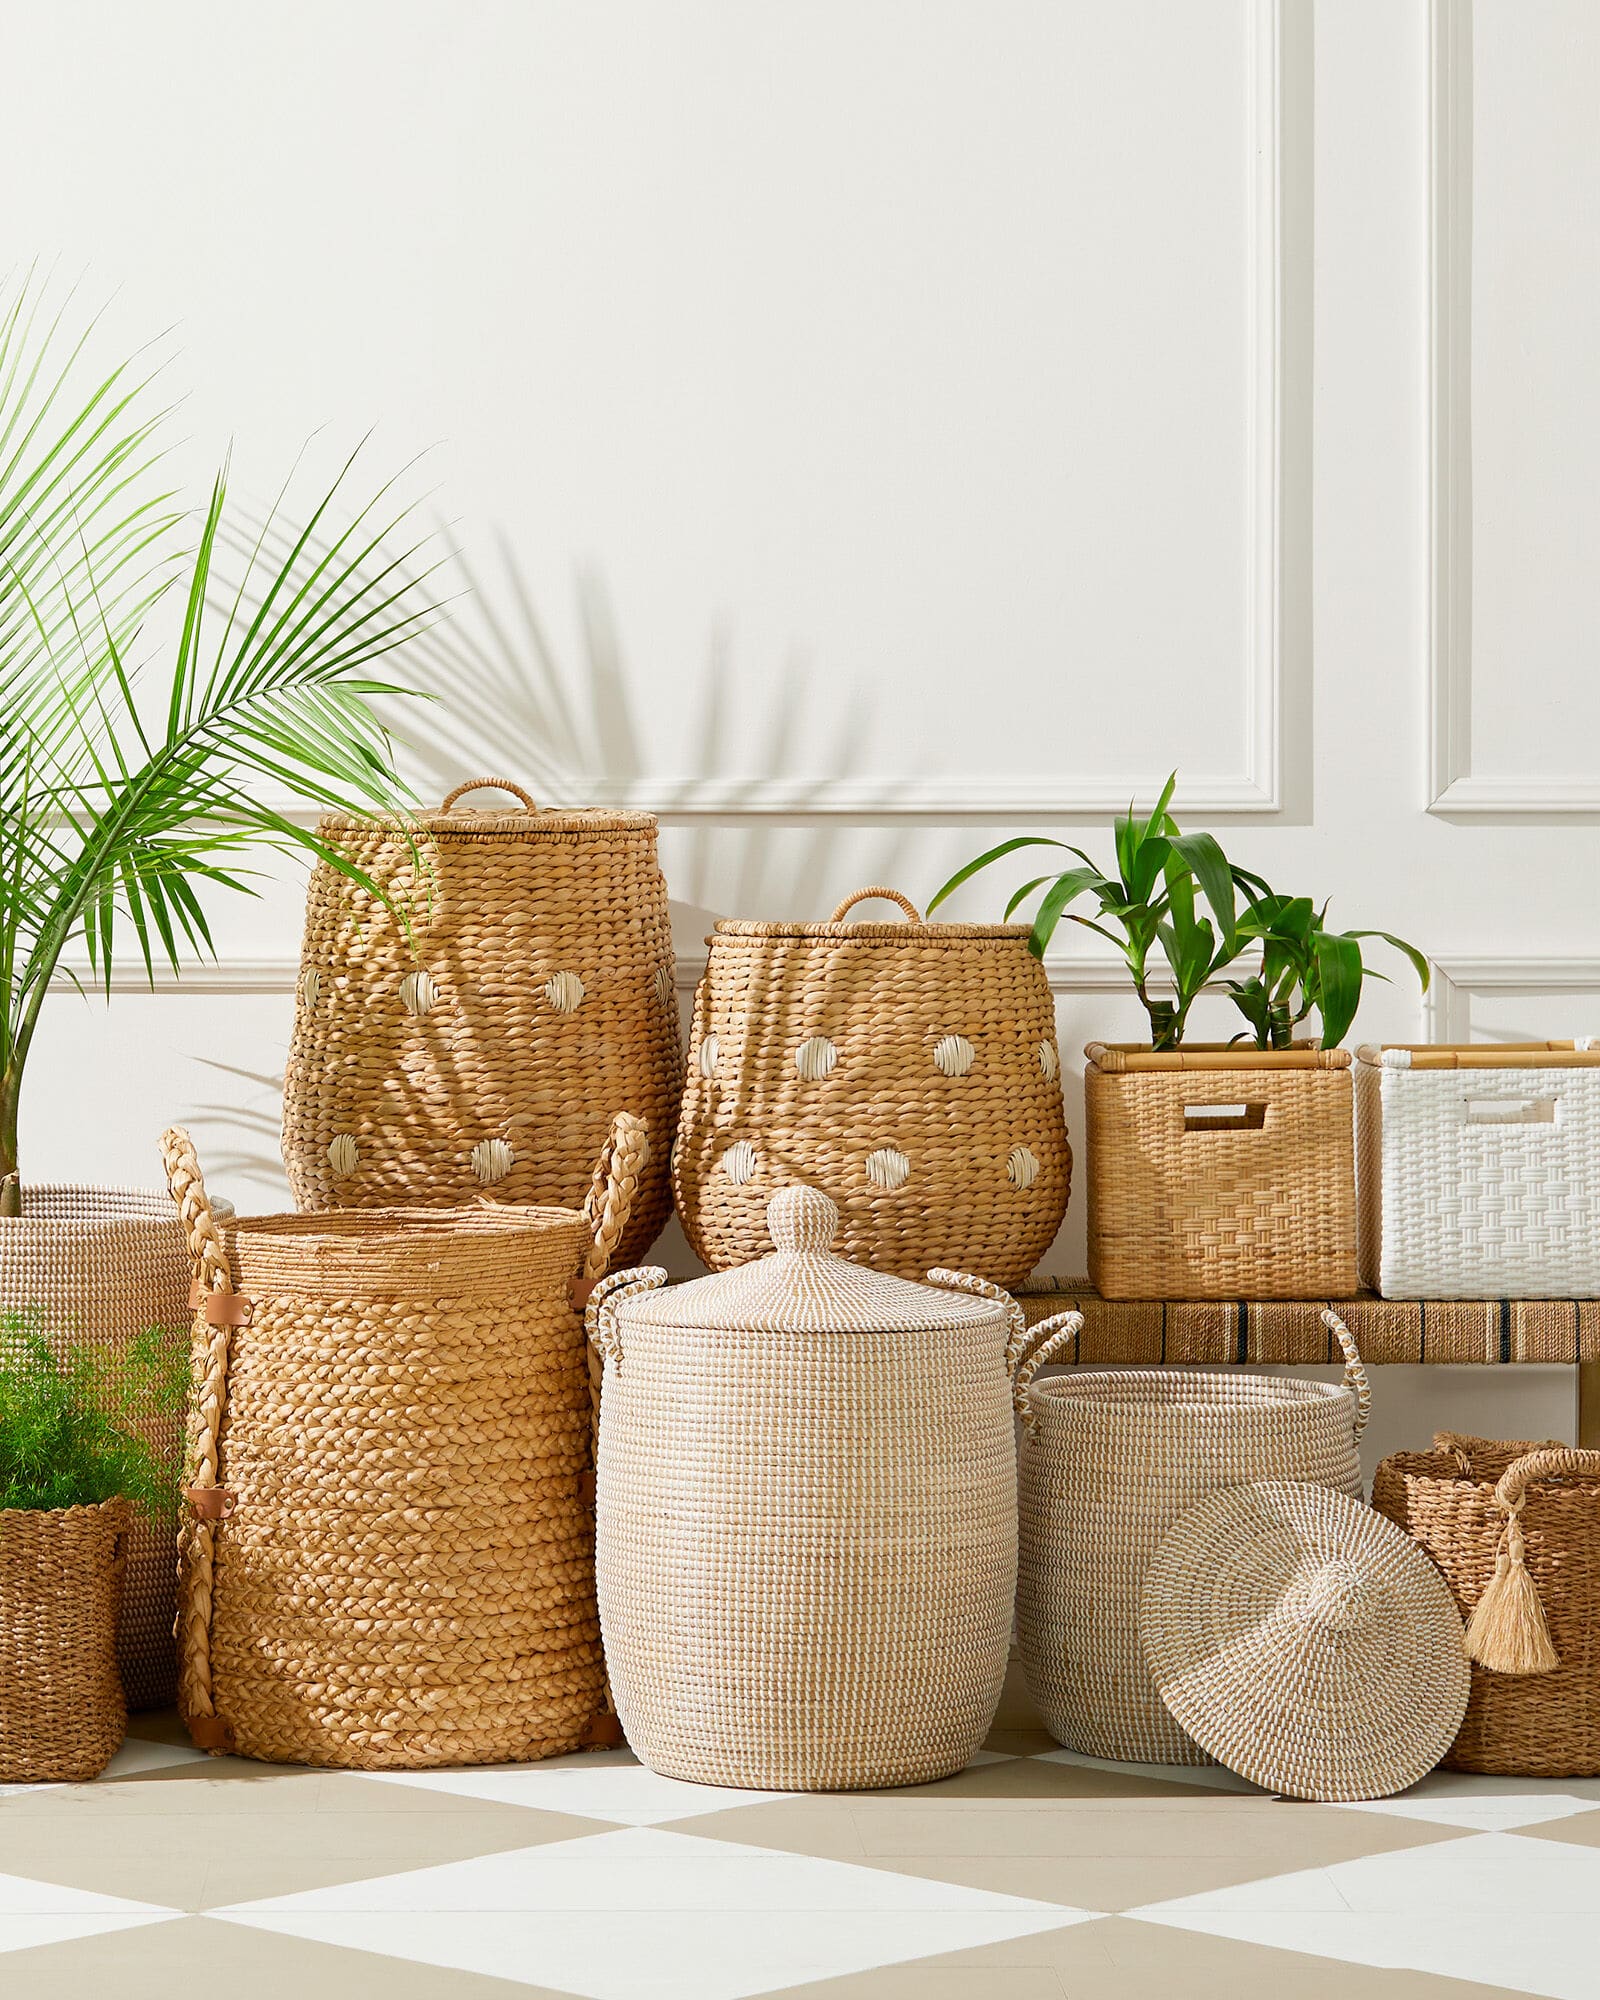 Favorite storage baskets from Serena & Lily ,gracious in size and perfect for organizing your home. organization | get organized | organize | organizing 